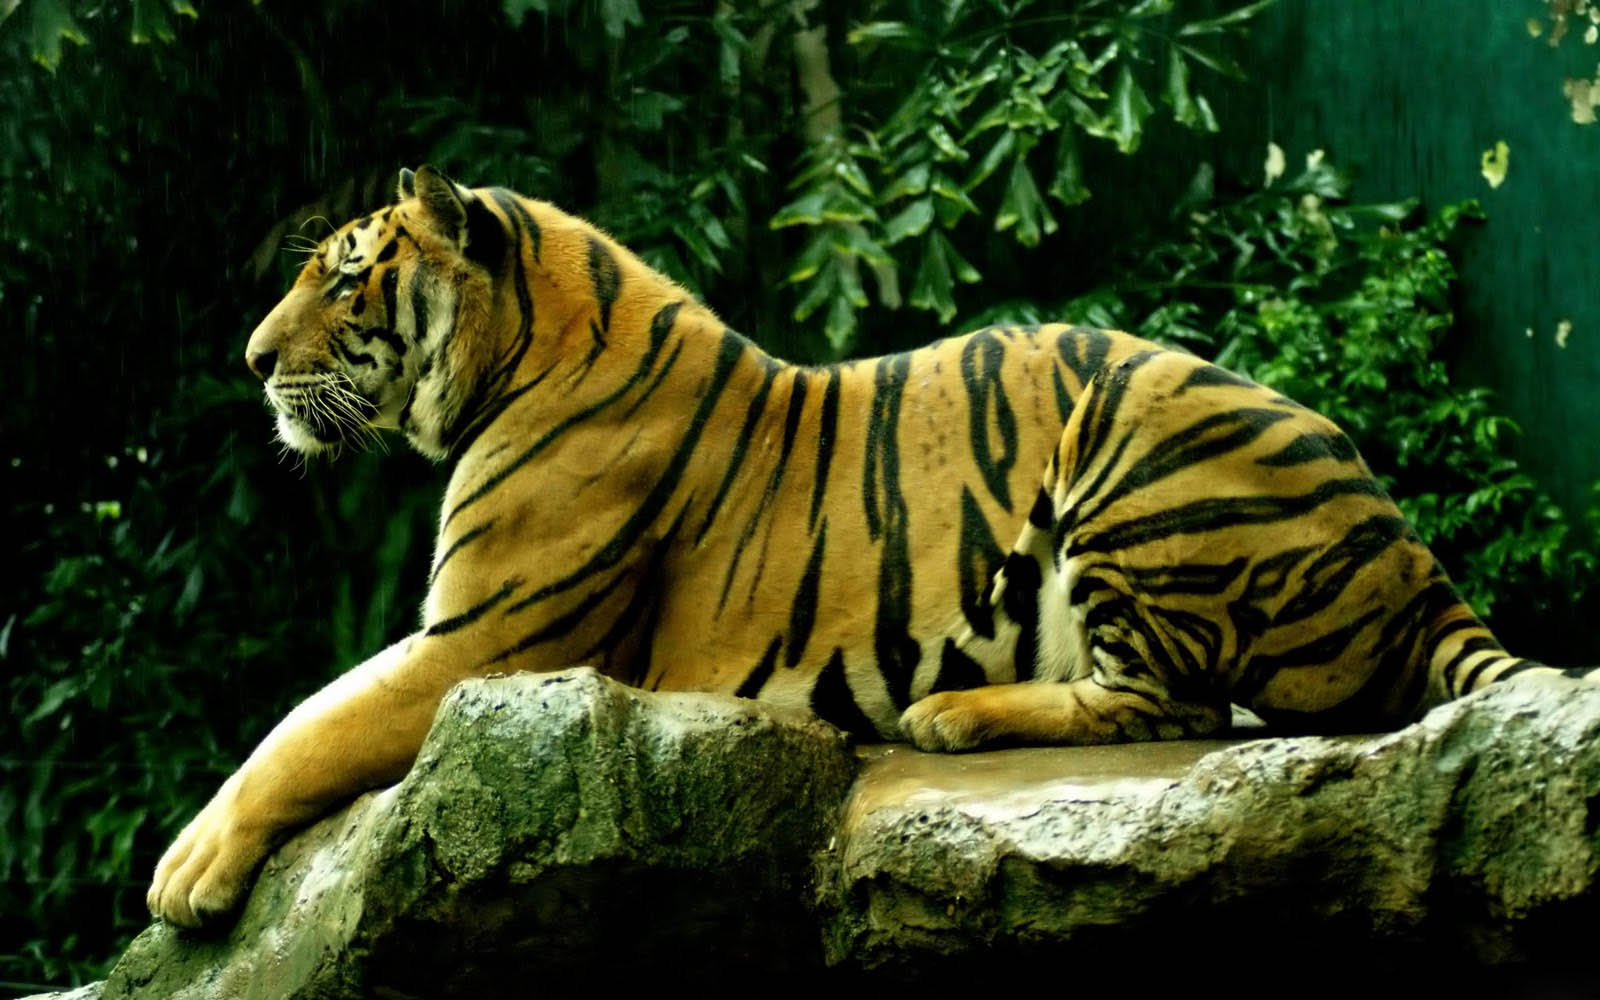  Free Tiger wallpapers and Tiger backgrounds for your computer desktop